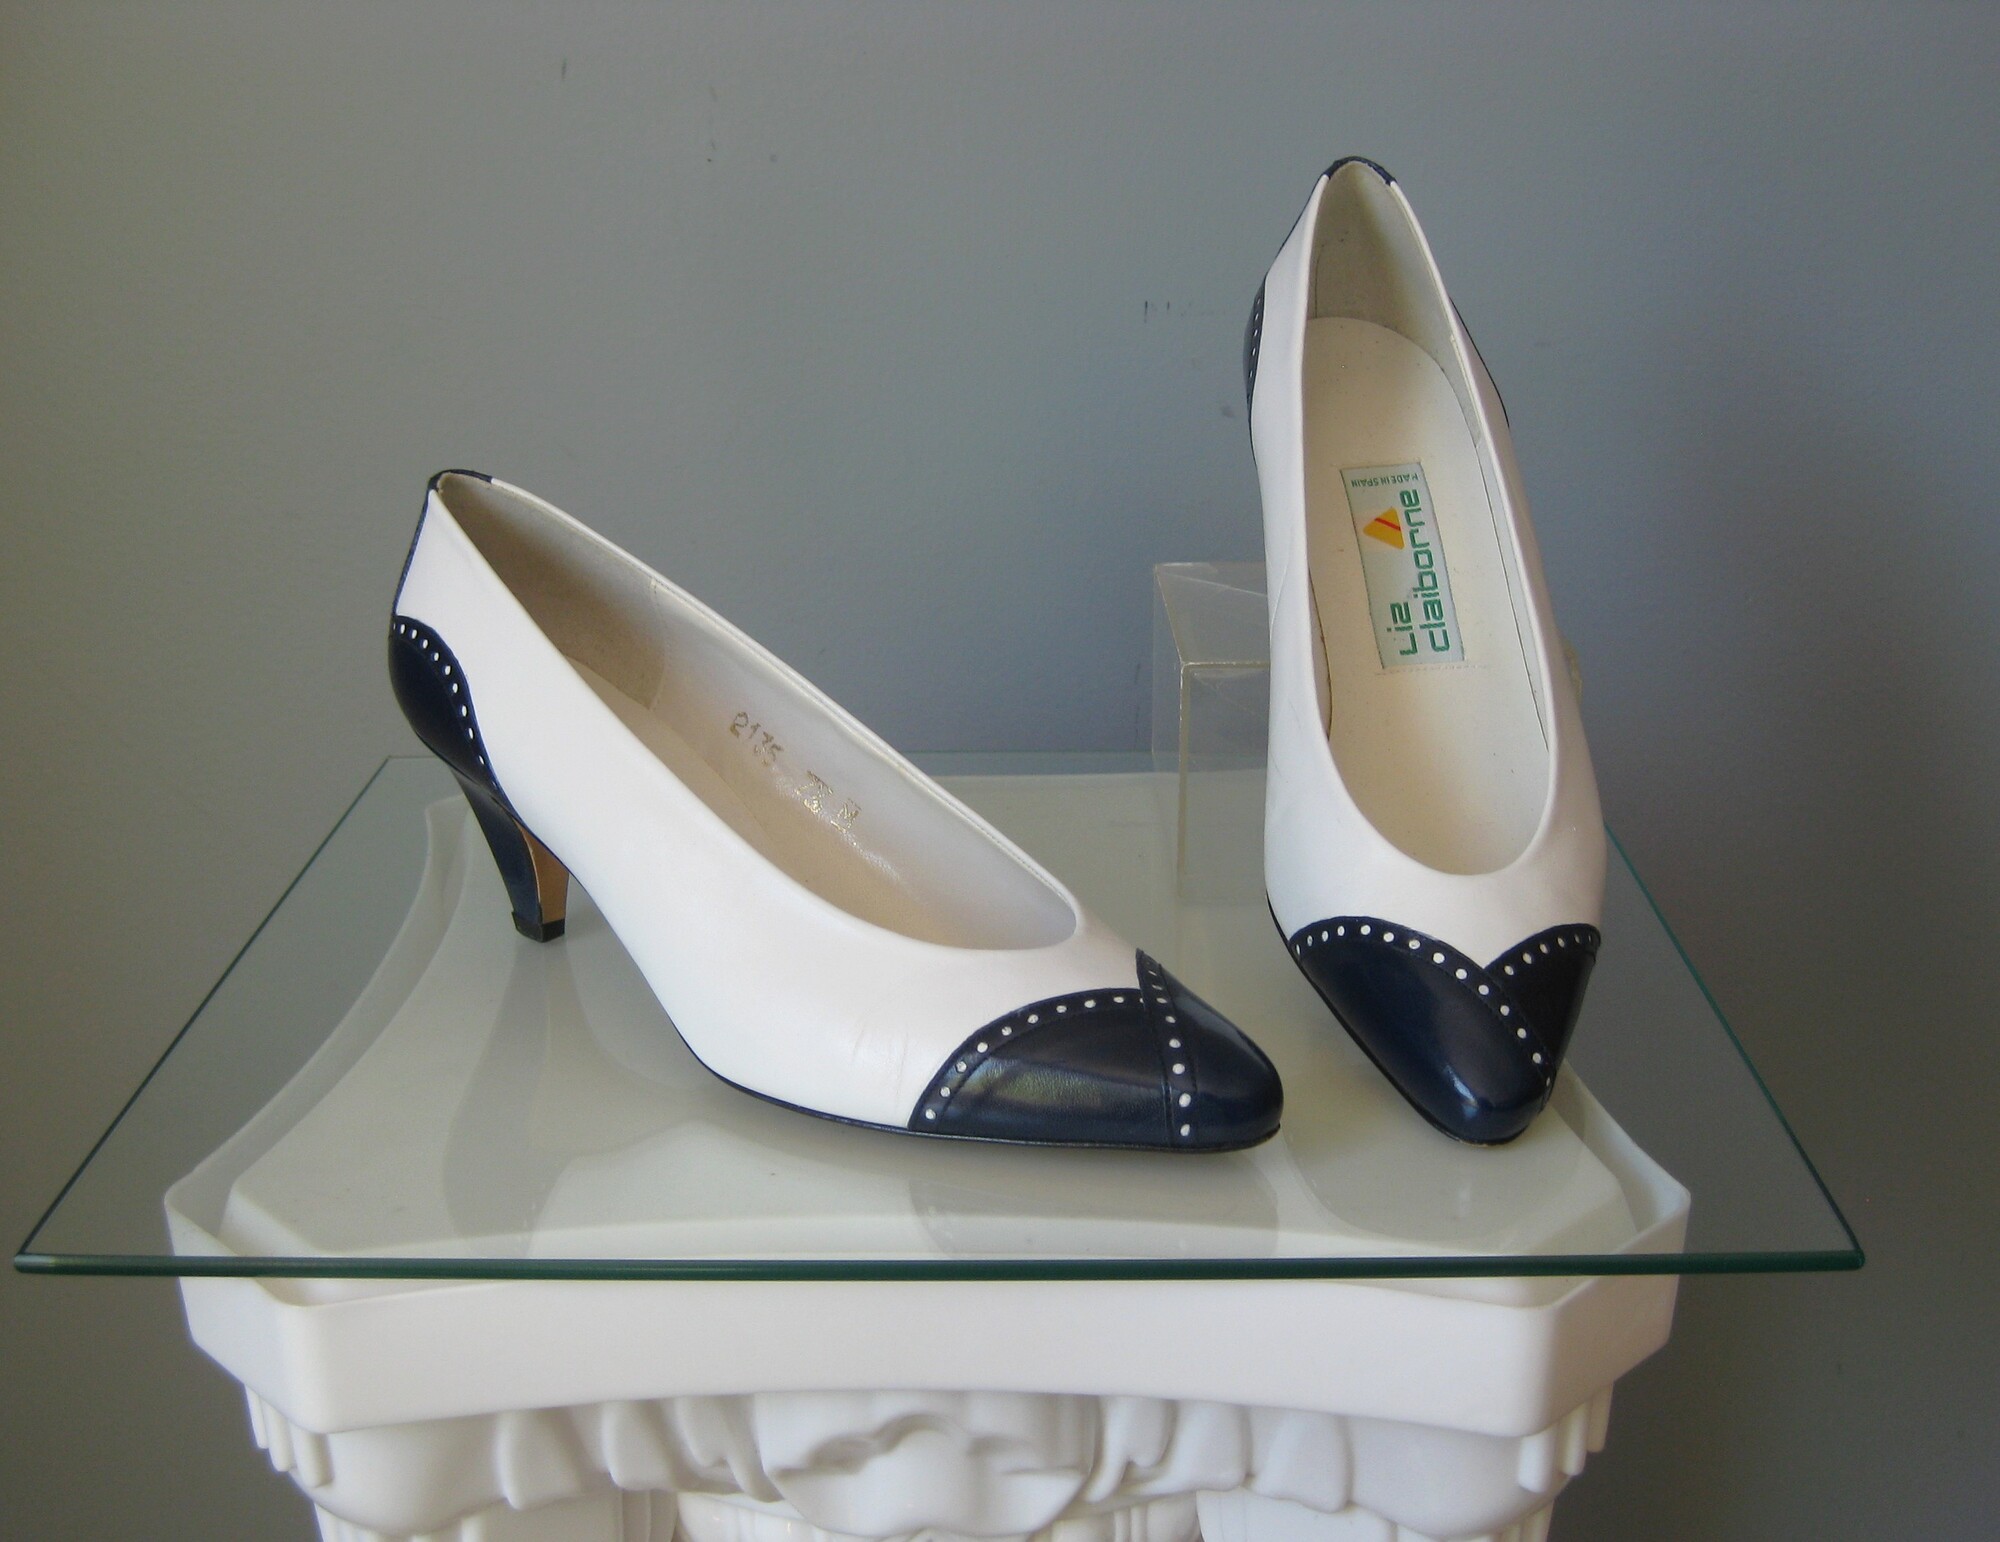 Vtg Liz Cl Spectators, Blue/wh, Size: 7.5

Vintage Liz Claiborne Navy Blue and White leather spectator pumps.
Made In Spain
Size 7.5
leather outsoles
2.5 heel
Interior length: aprox. 10
outsole width at widest point: just over 3

Amazing condition!  They were worn a few times apparently but virtually no signs on the uppers.

Thank you for looking!
#45397